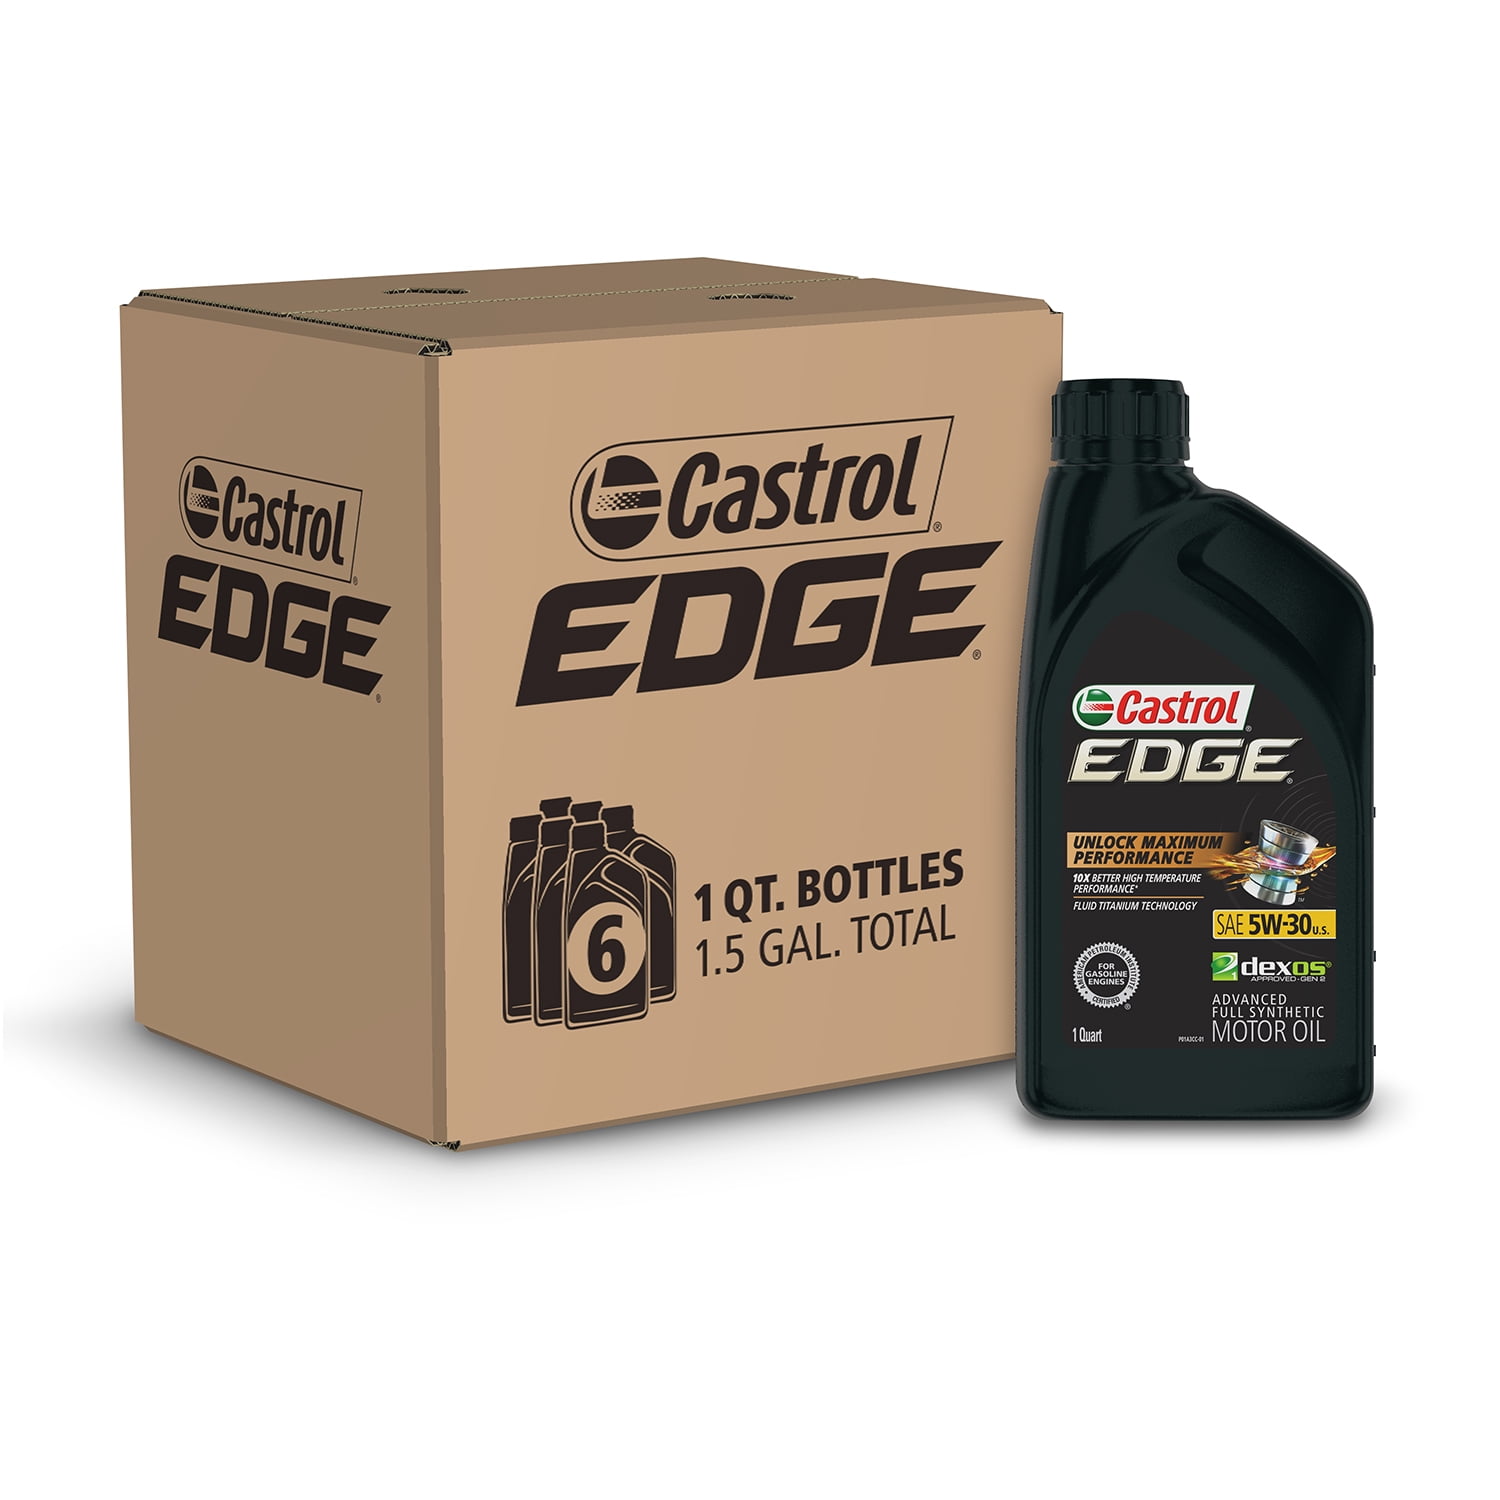  Castrol Edge 5W-30 Advanced Full Synthetic Motor Oil, 5 Quarts,  Pack of 3 : Automotive